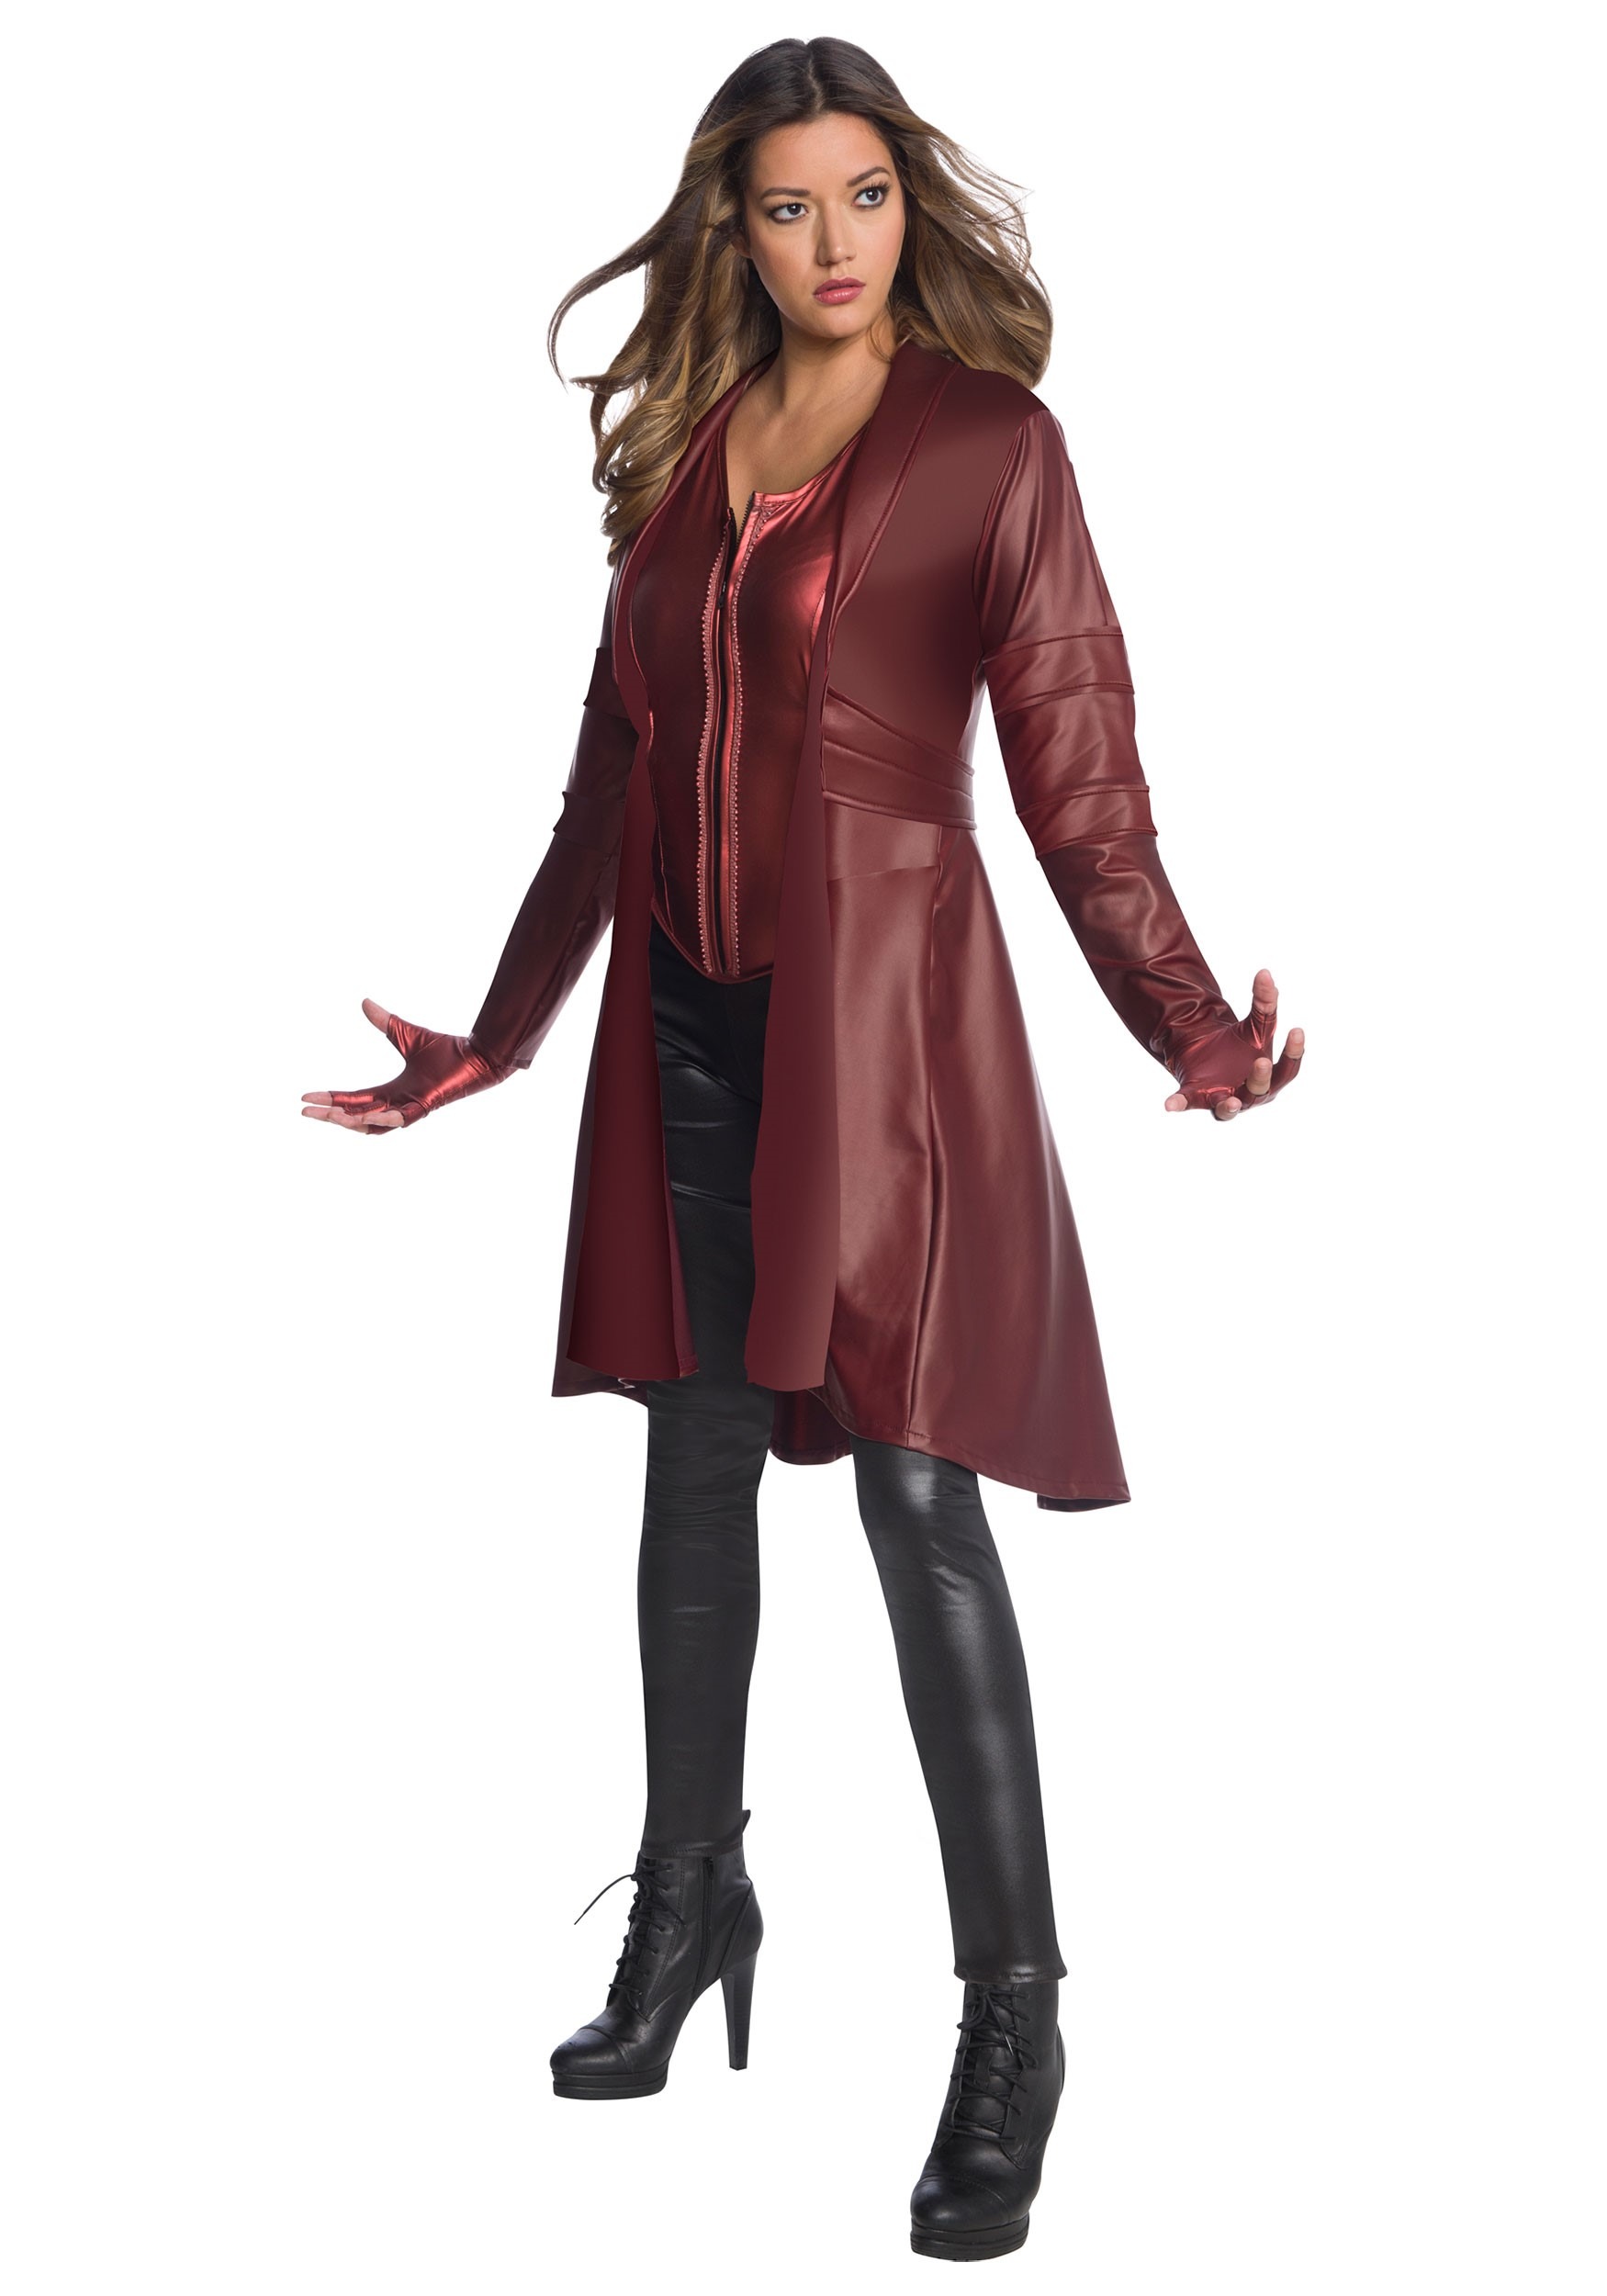 Scarlet Witch Costume For Halloween – All Halloween Costumes